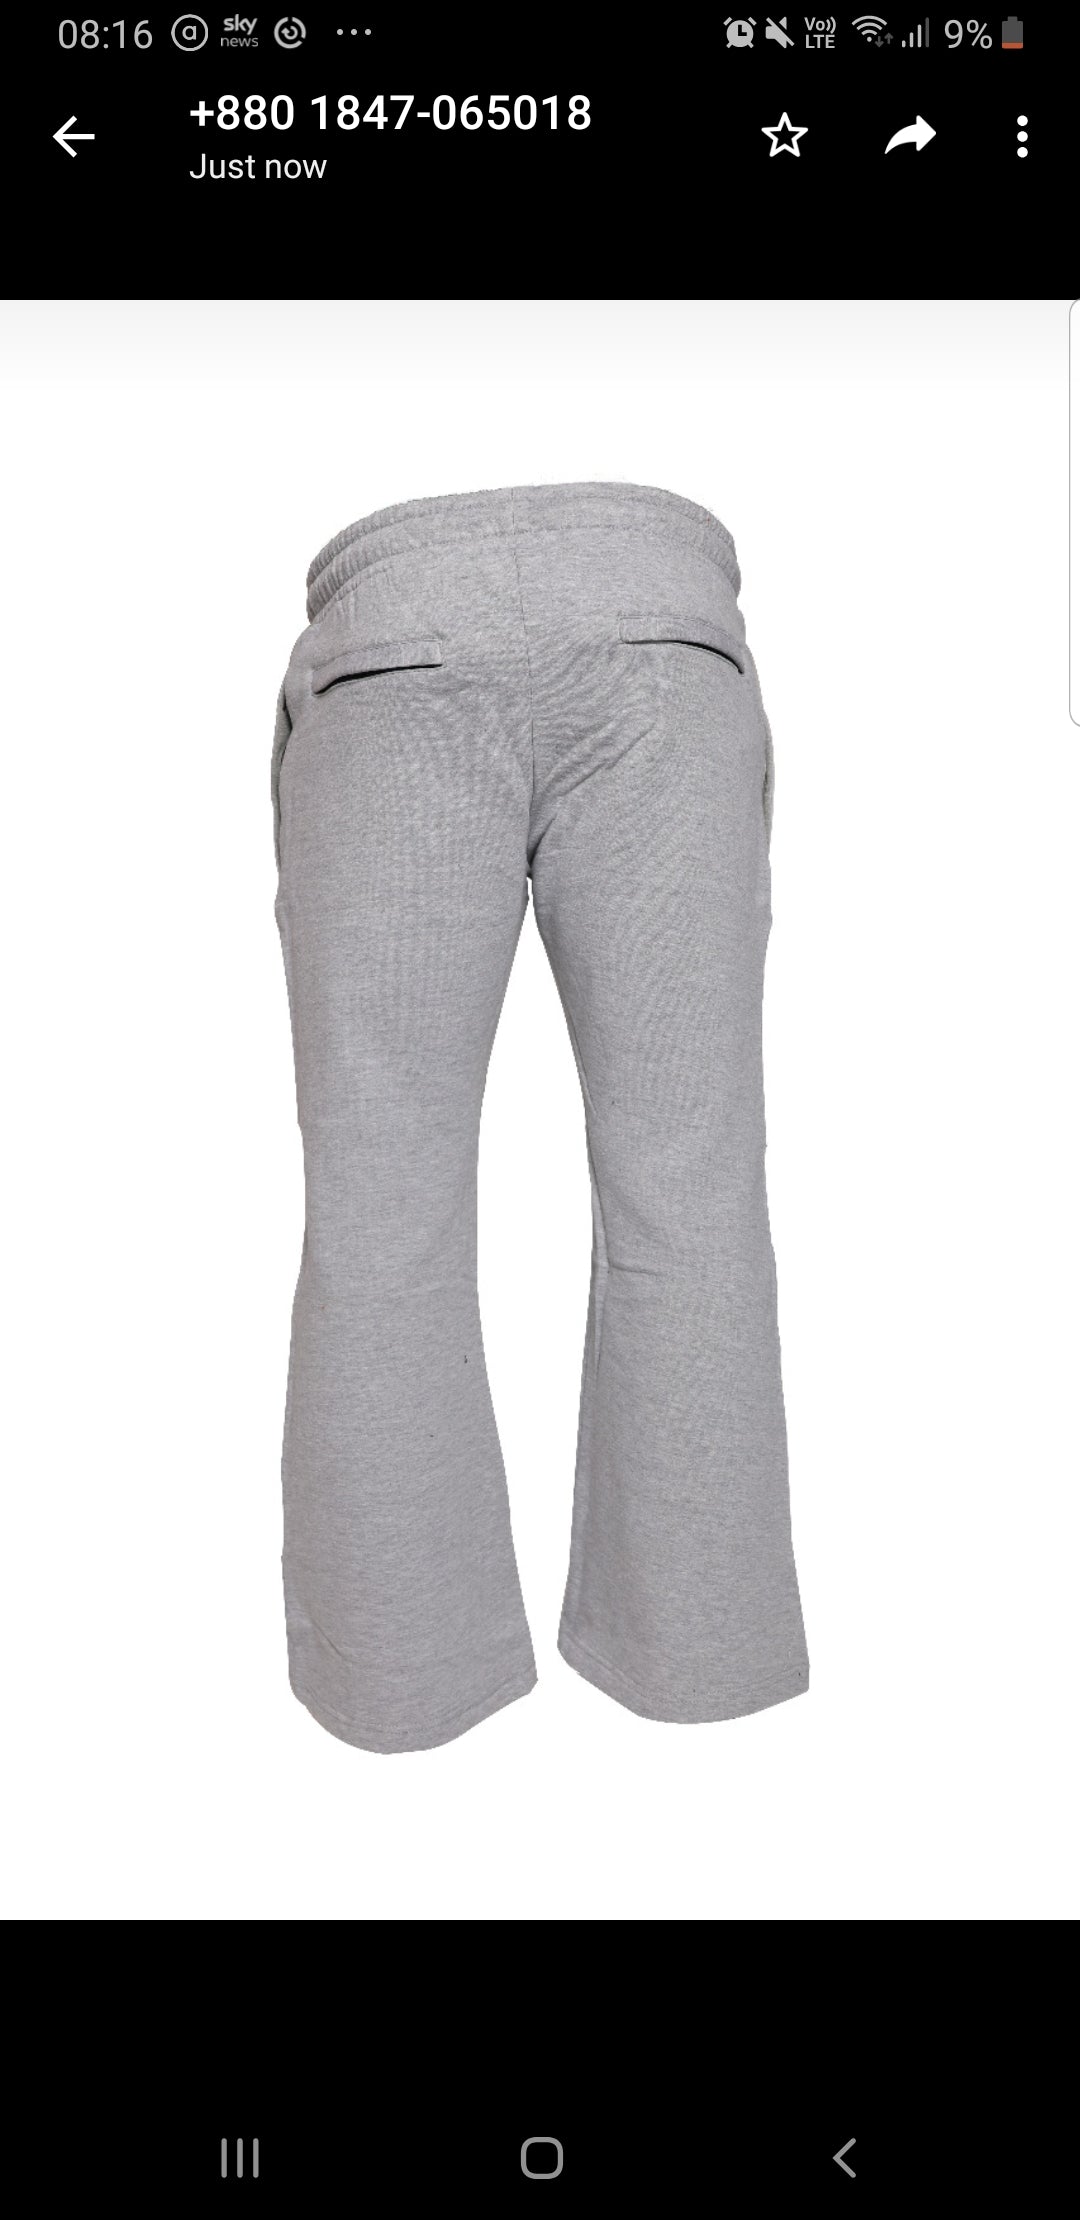 Flare Unisex Trousers with zipper pocket - Grey